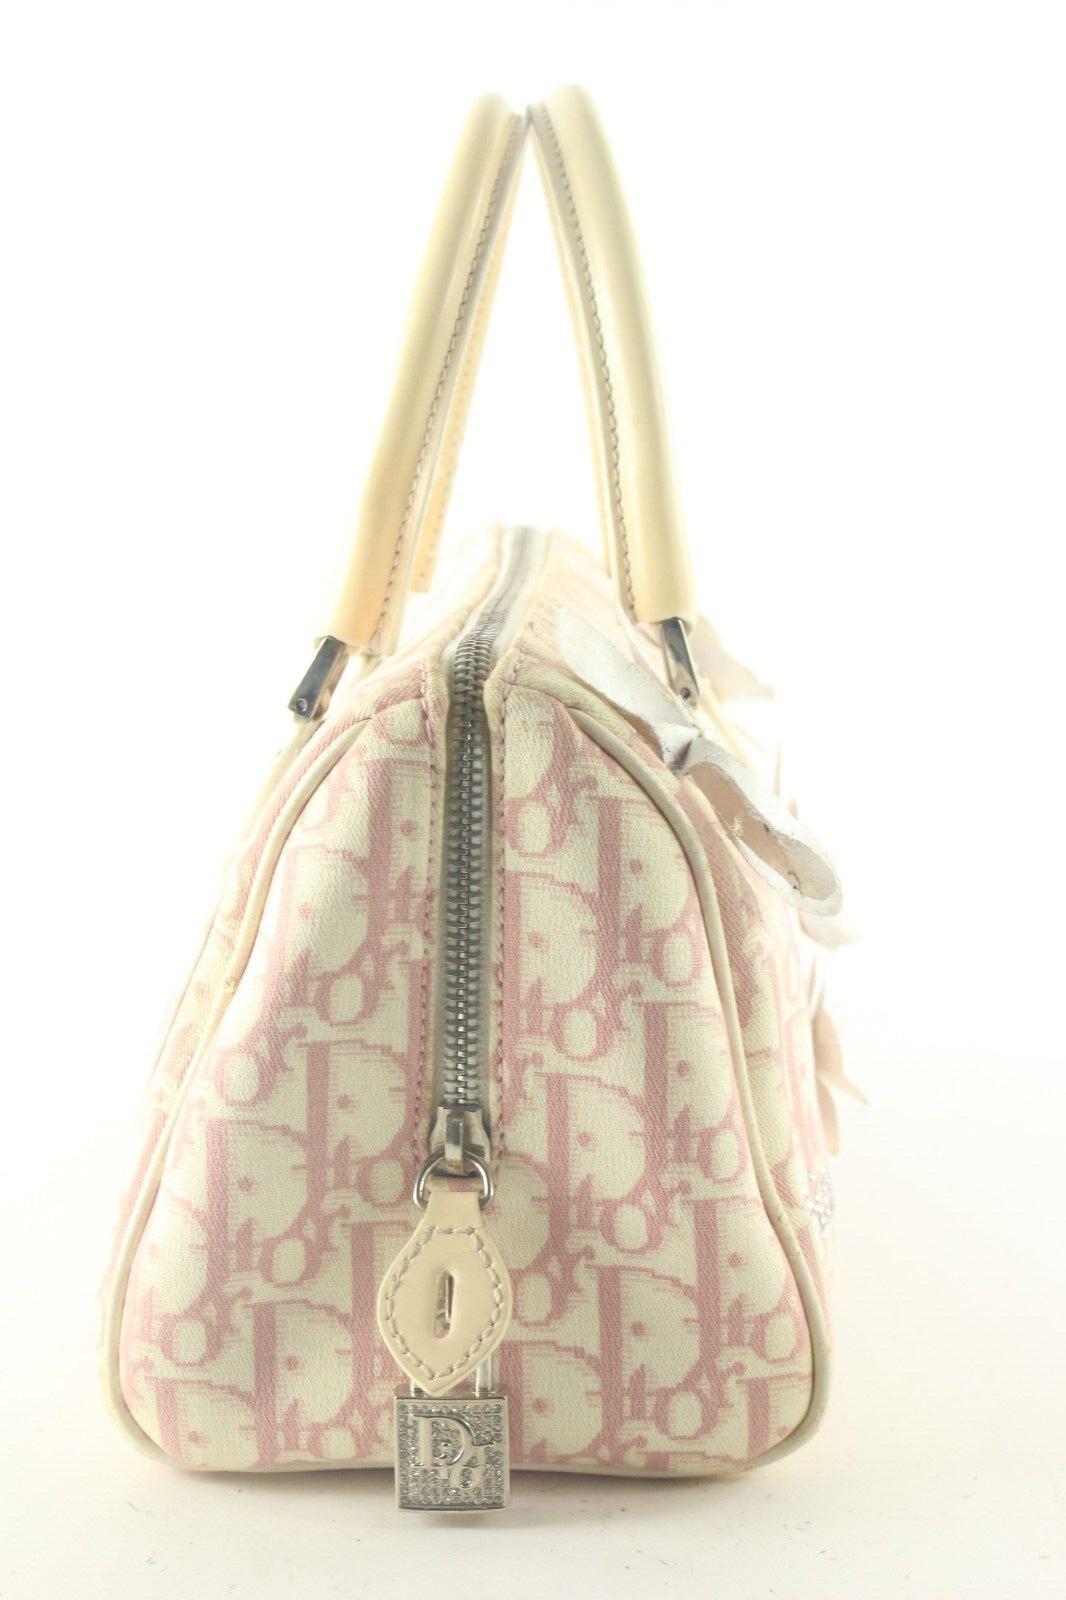 Christian Dior Canvas Girly Chic Pink Trotter Boston Bag 1D83K 7